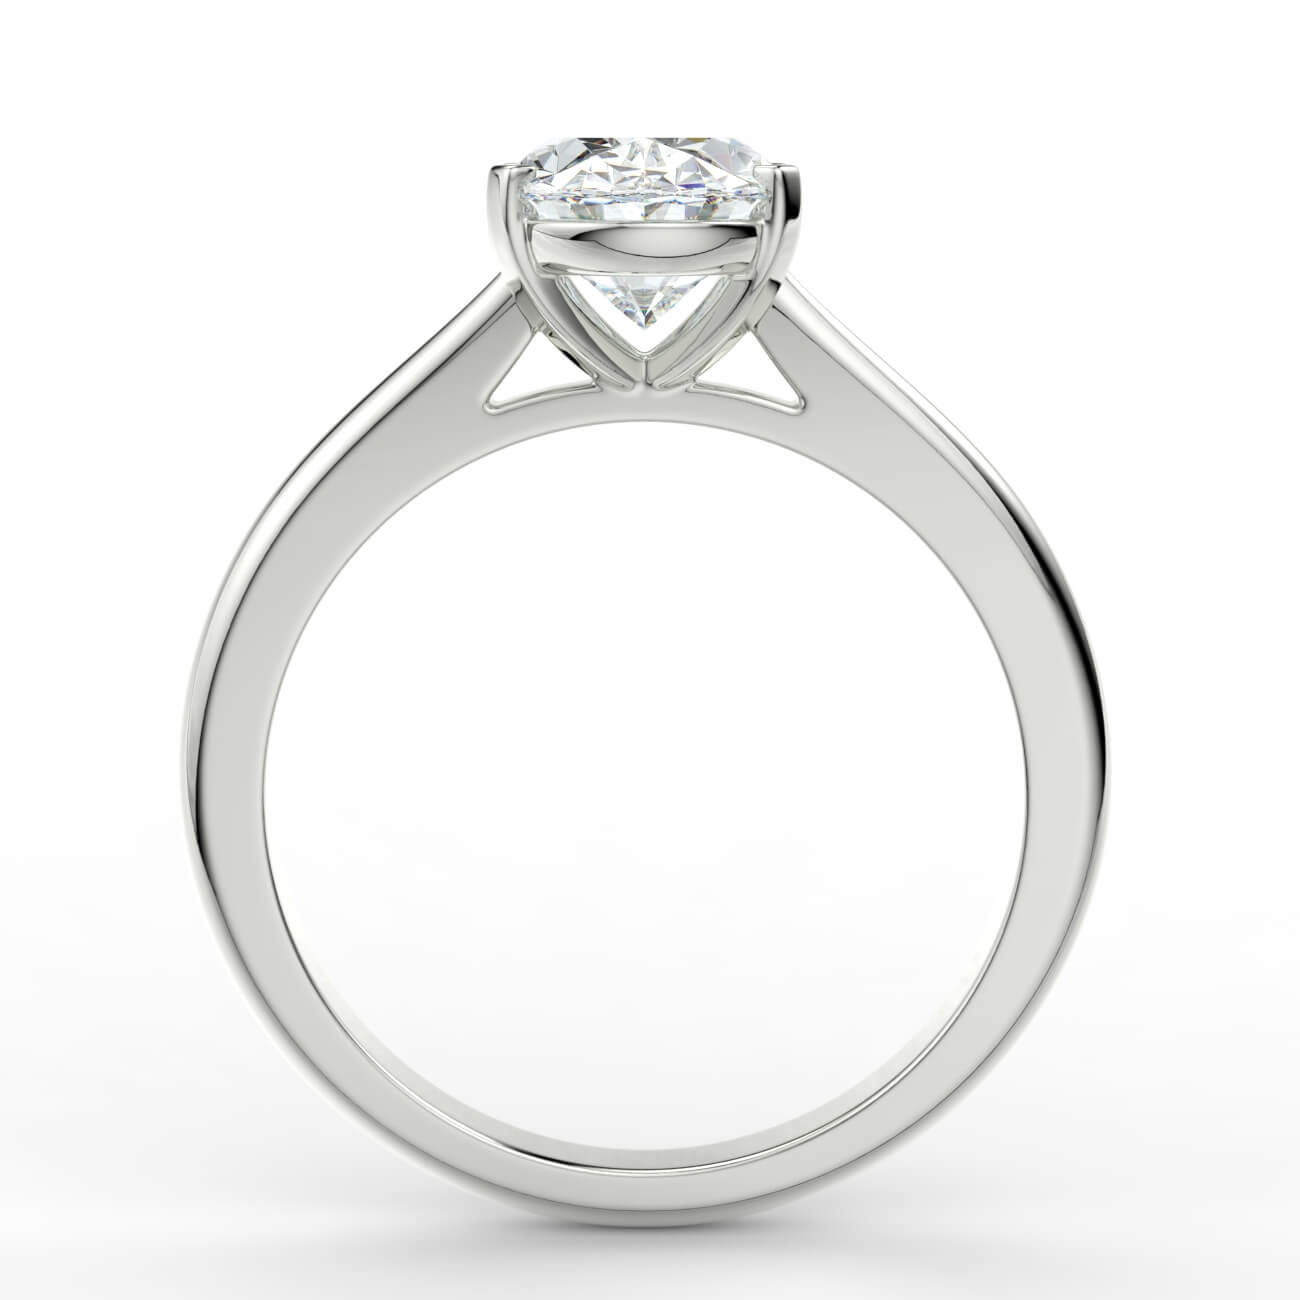 Oval cut diamond cathedral engagement ring in white gold – Australian Diamond Network